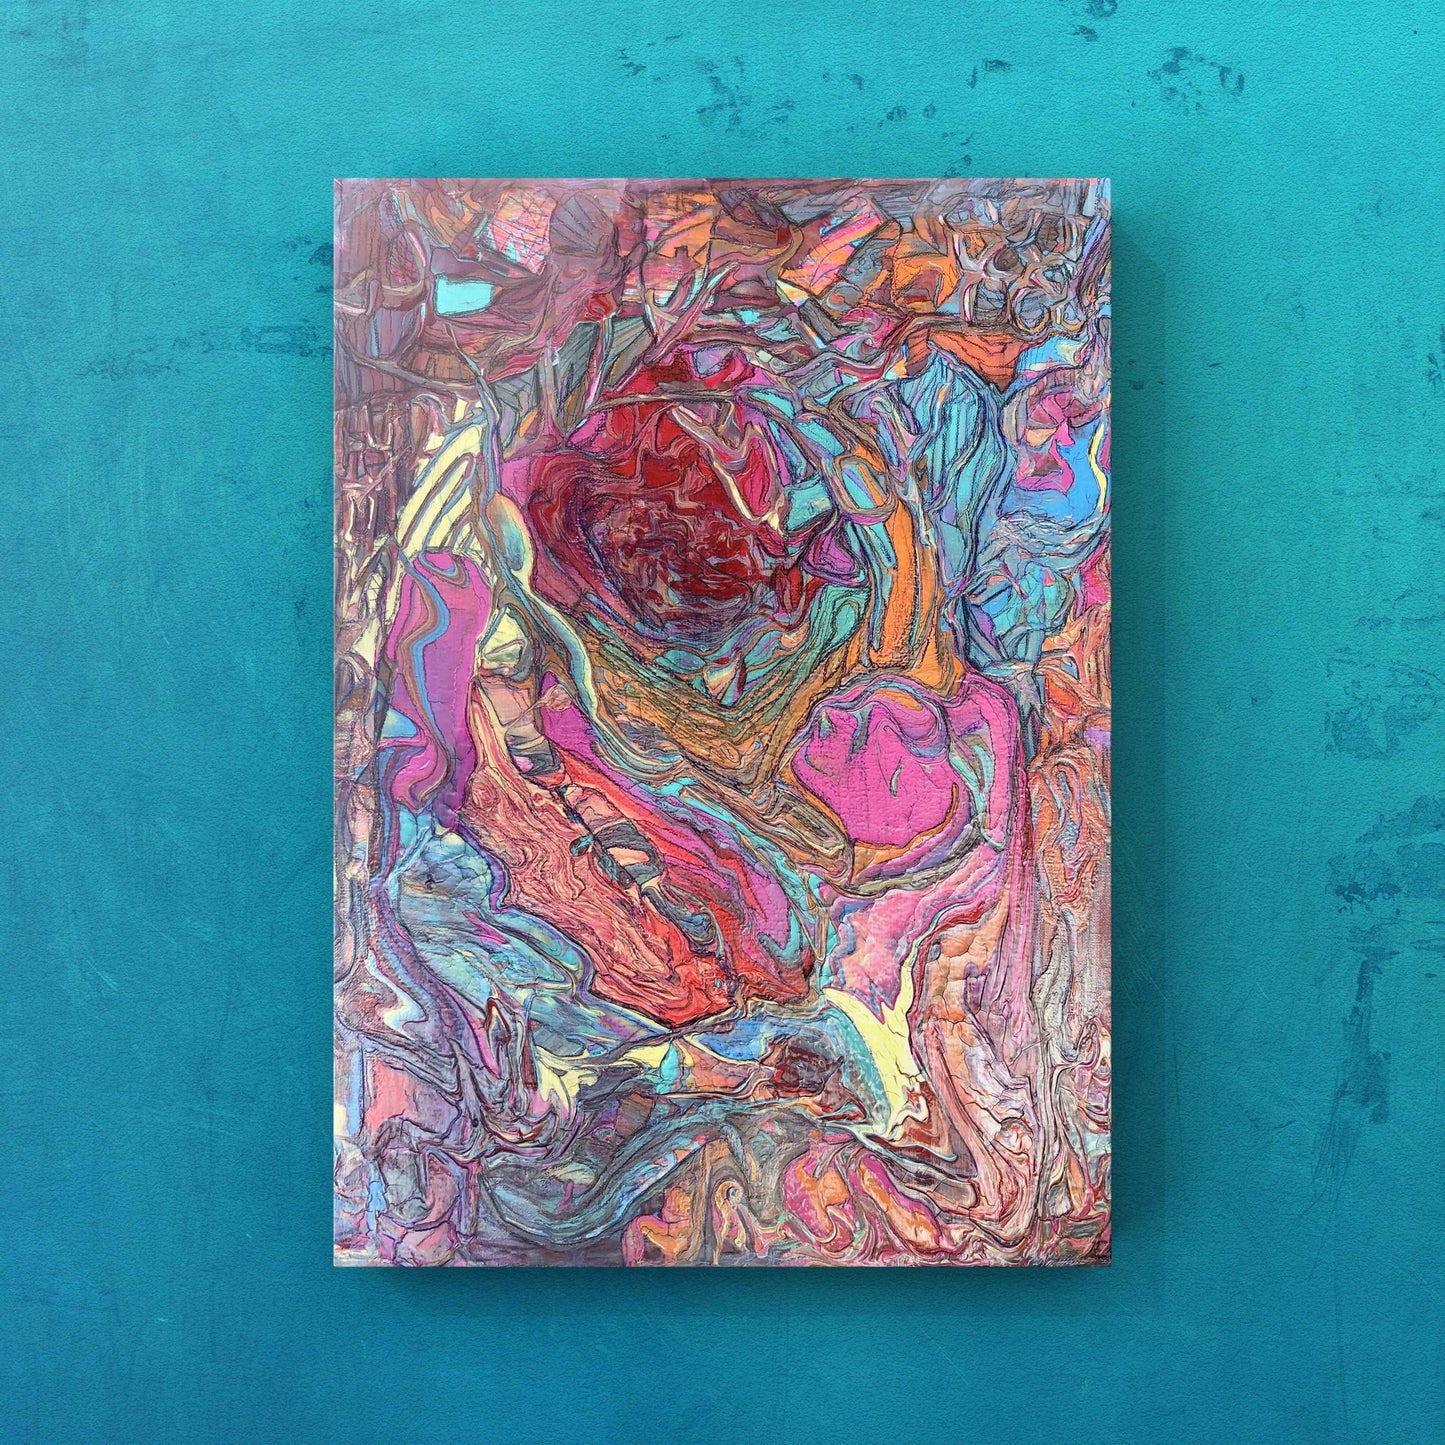 Energy - Mixed Media, Swirly And Textured, Glossy Design Painting, by Art with Evie